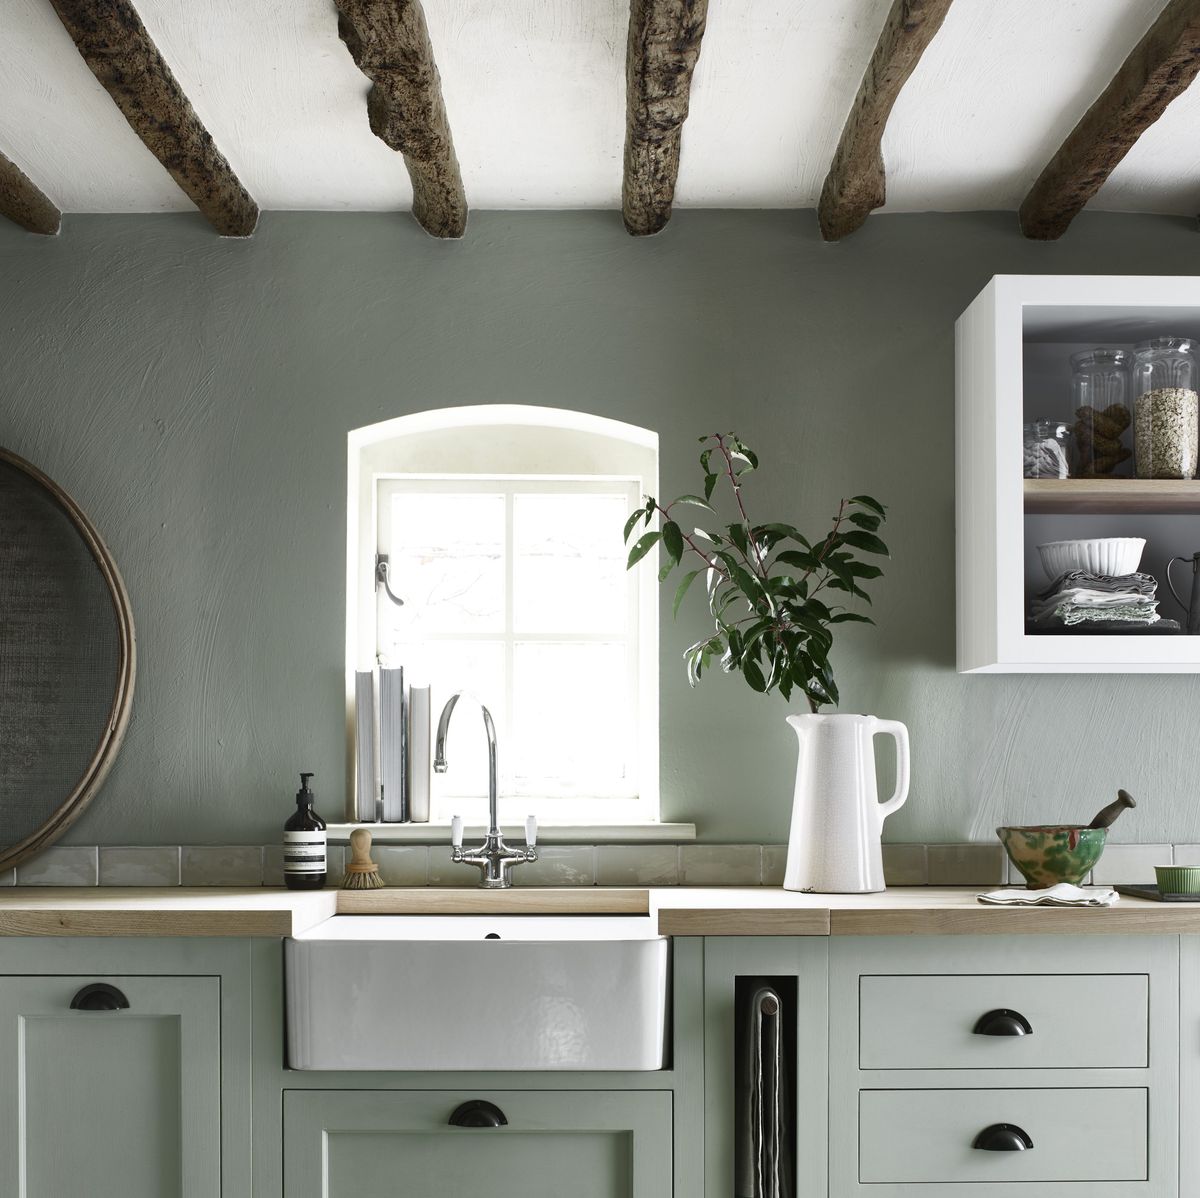 https://hips.hearstapps.com/housebeautiful.cdnds.net/17/39/1506512811-neptune-henley-kitchen-hand-painted-in-sage-from-14000-3.jpg?crop=0.966xw:0.723xh;0.00641xw,0.0349xh&resize=1200:*